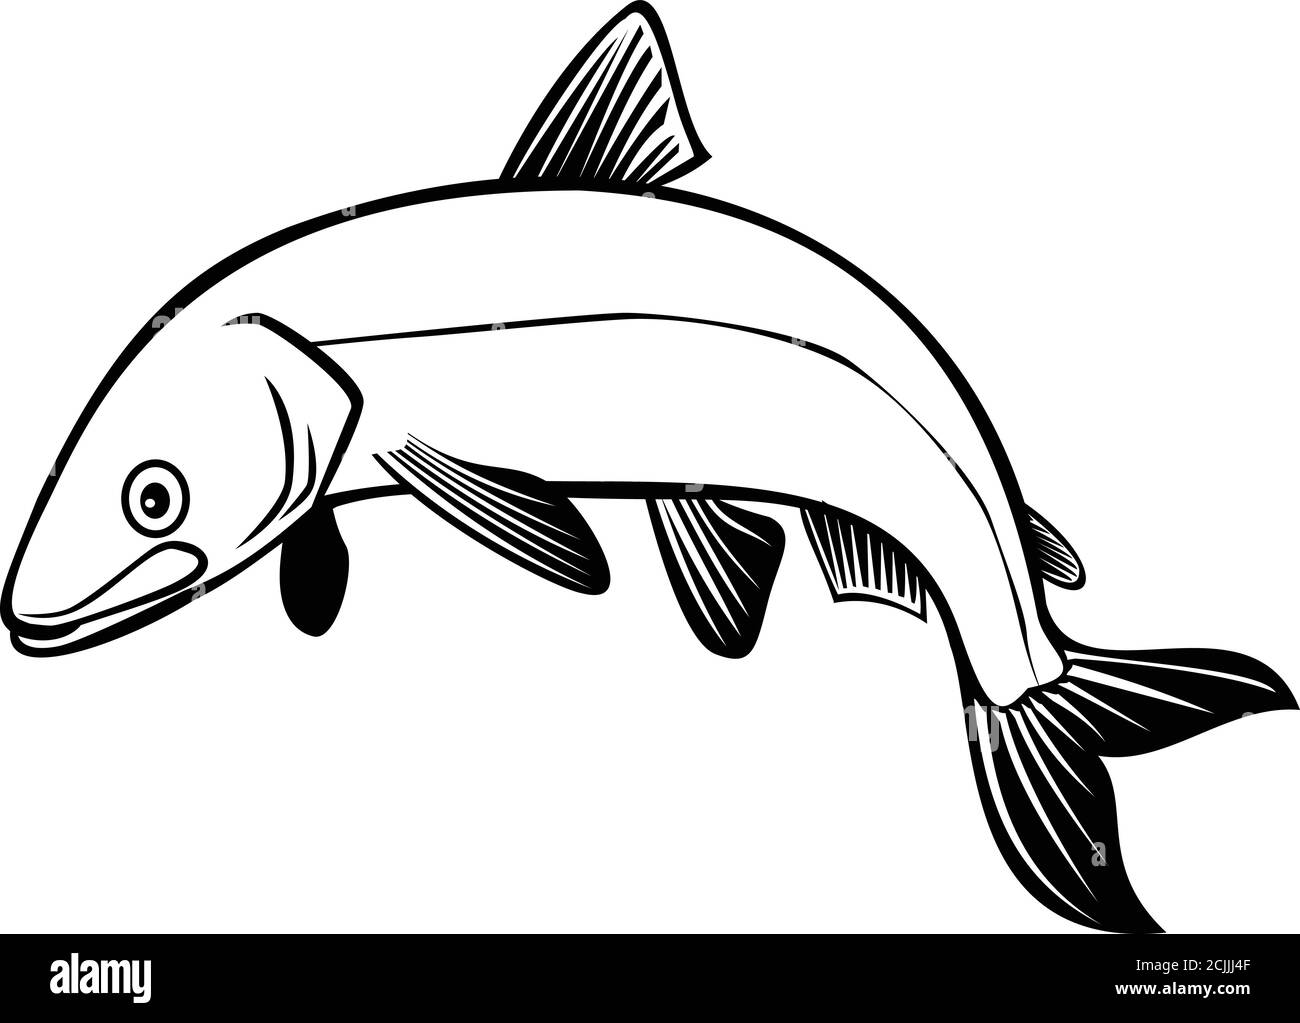 Retro style illustration of a bloater or Coregonus hoyi, a species or form of freshwater whitefish in the family Salmonidae, jumping up on isolated ba Stock Vector